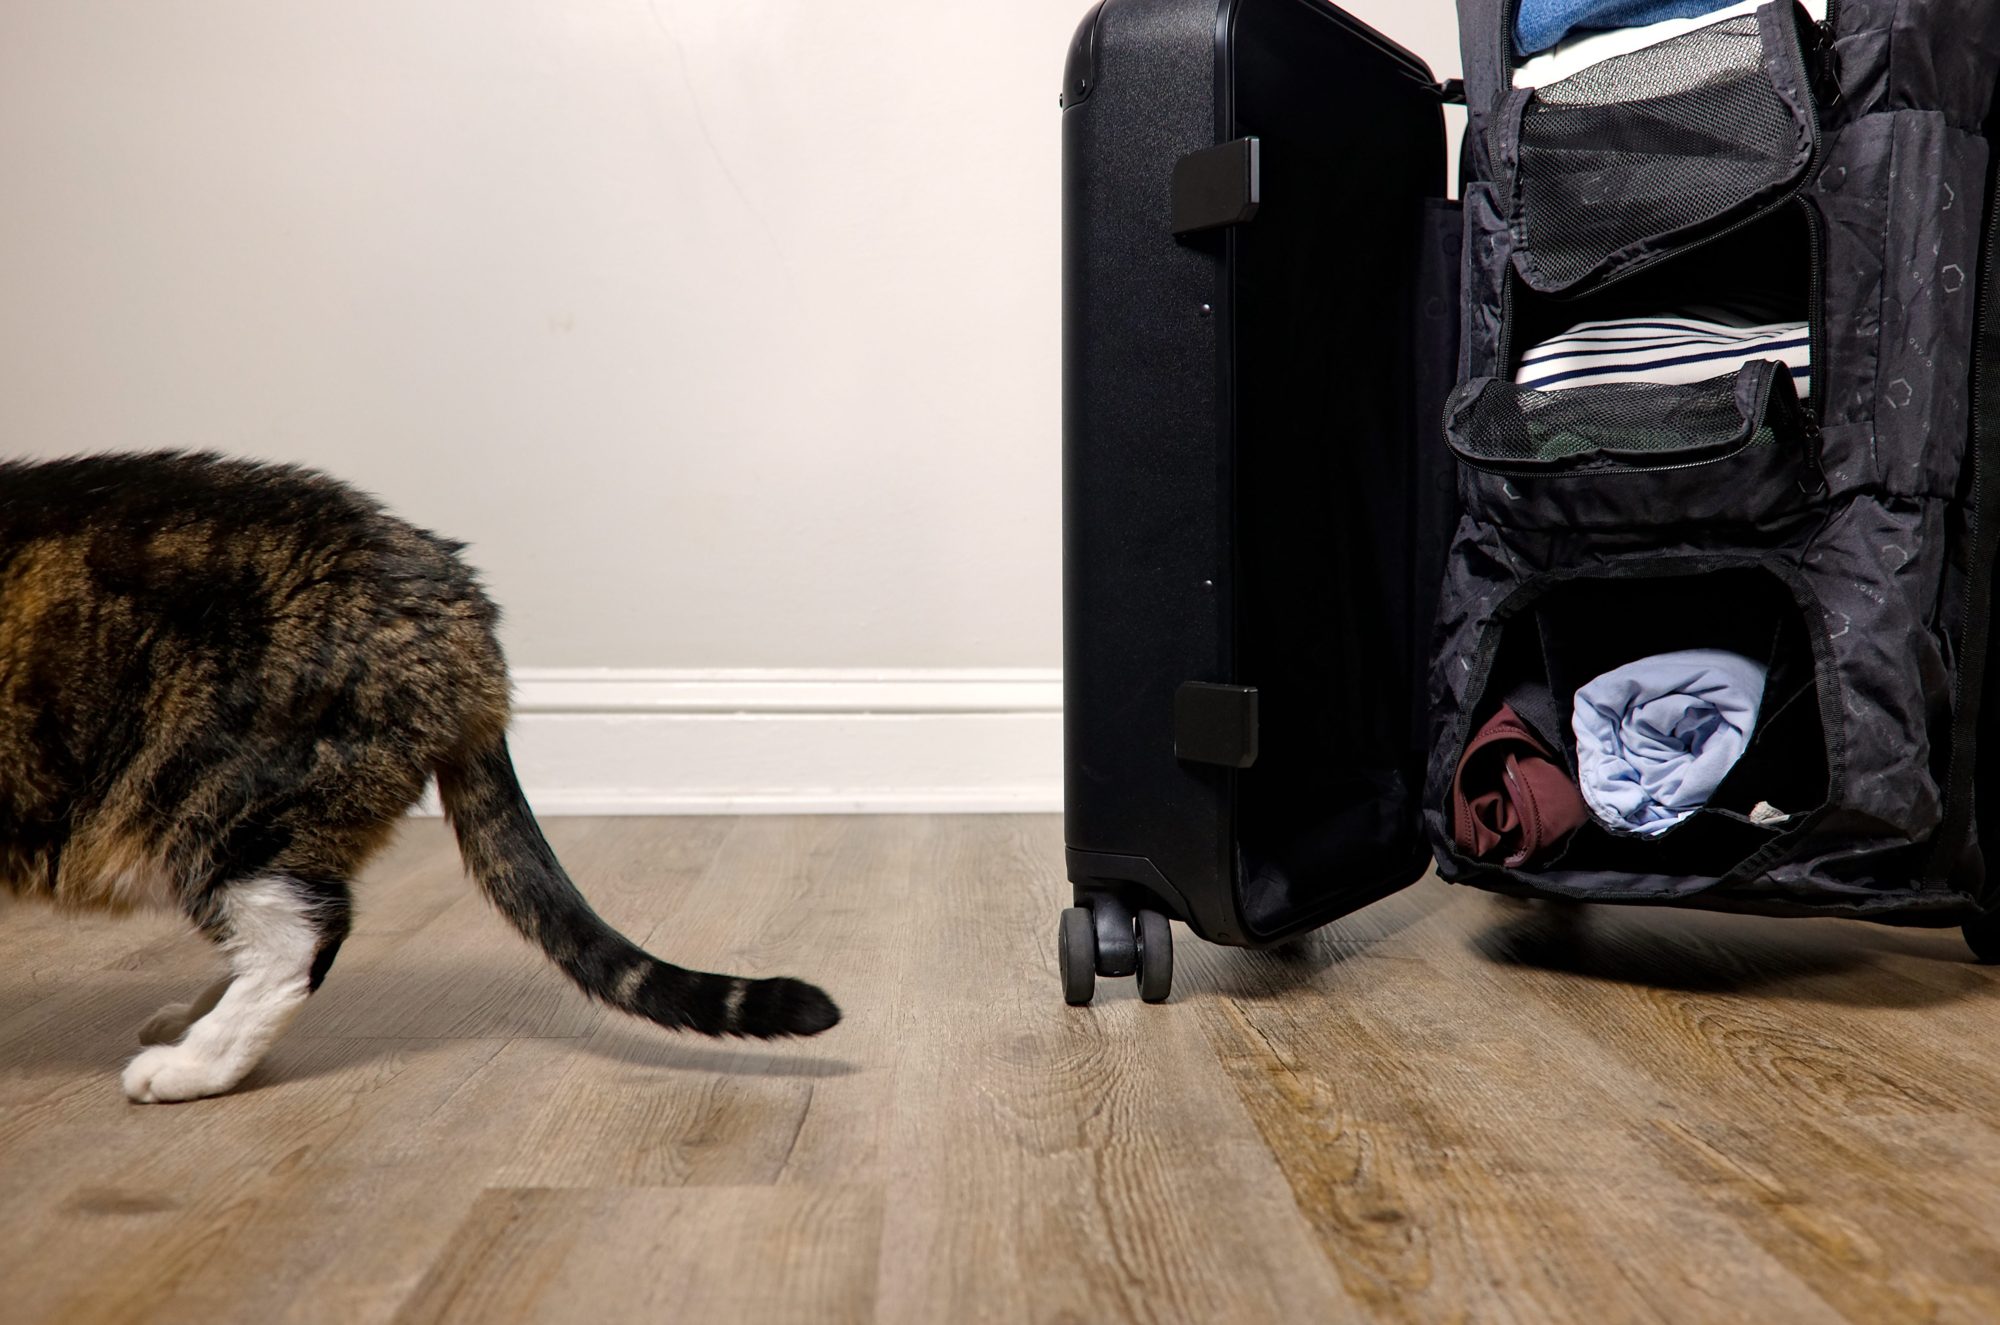 Meow walks past the Carry-On Closet